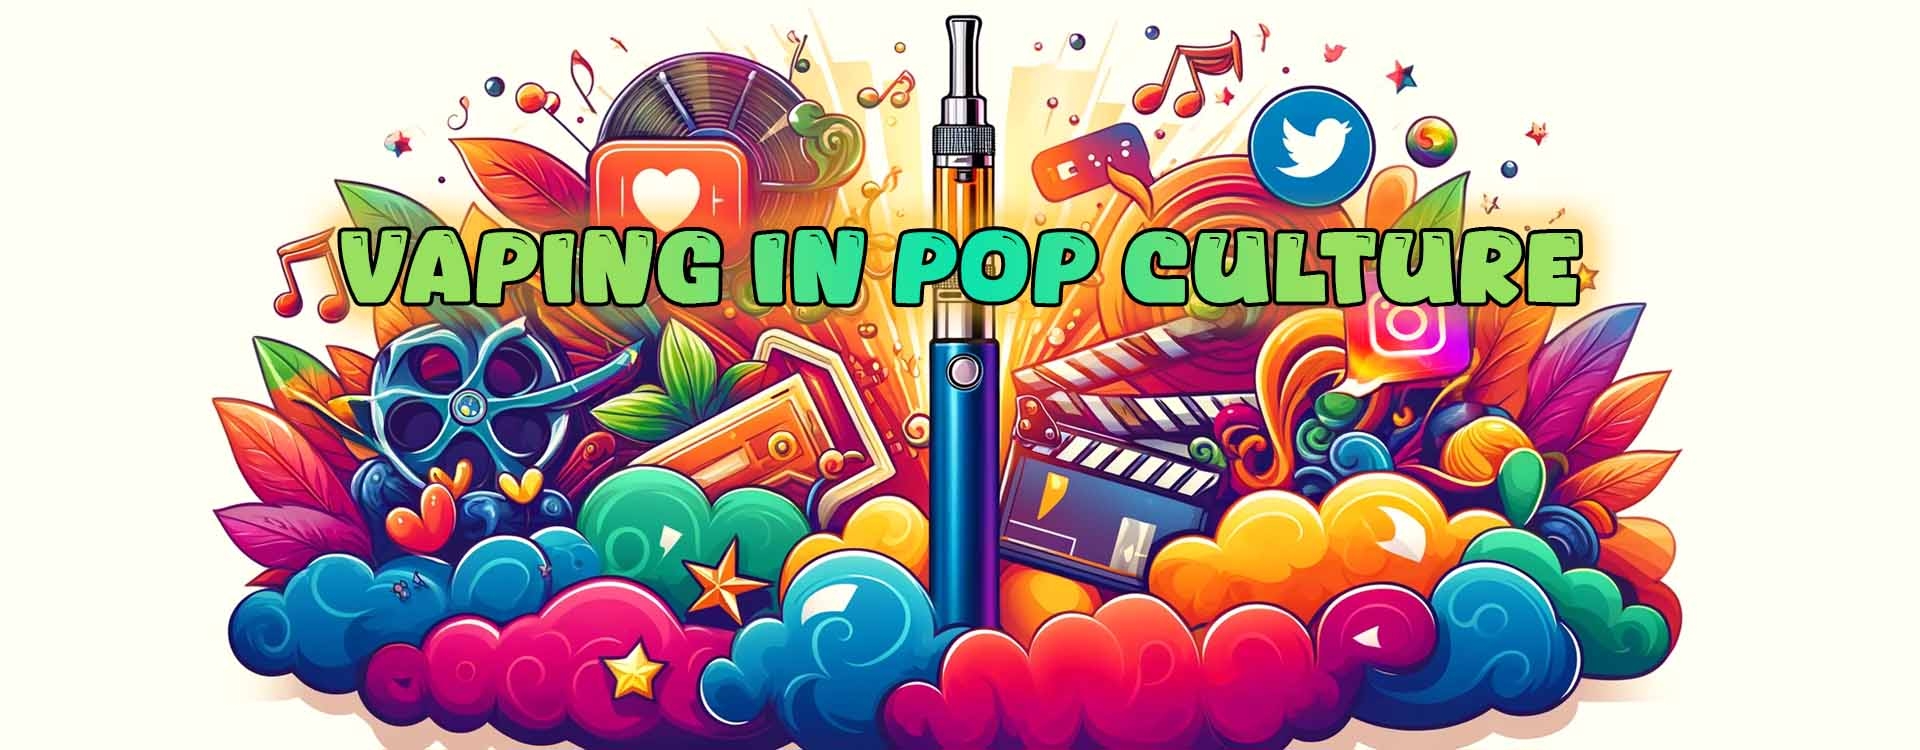 Pop culture and Vaping